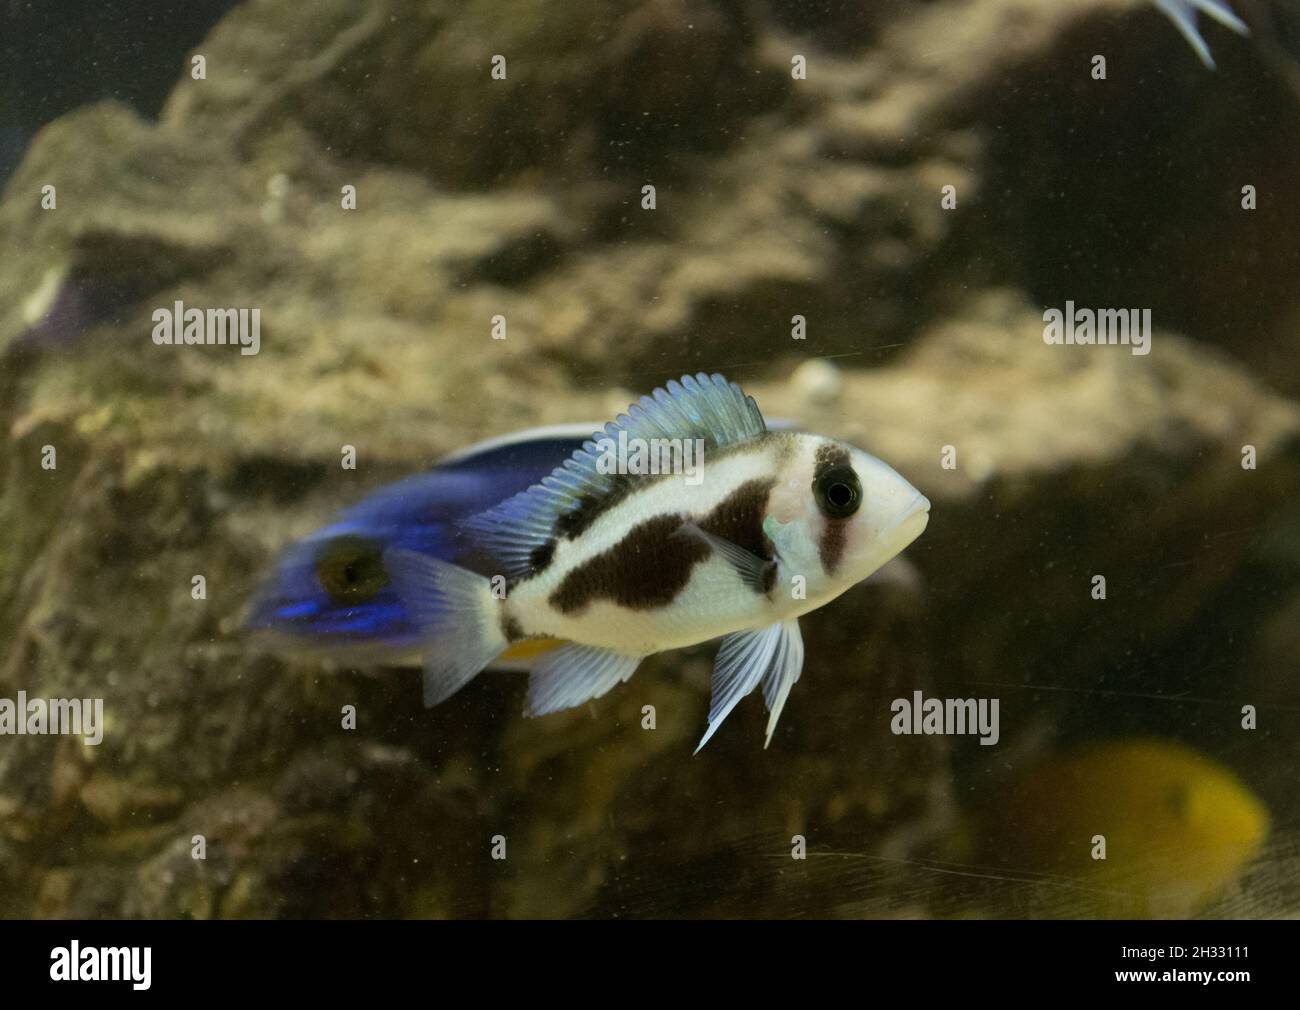 Closeup of a small frontosa cichlid swimming in an aquarium with a blurry background Stock Photo